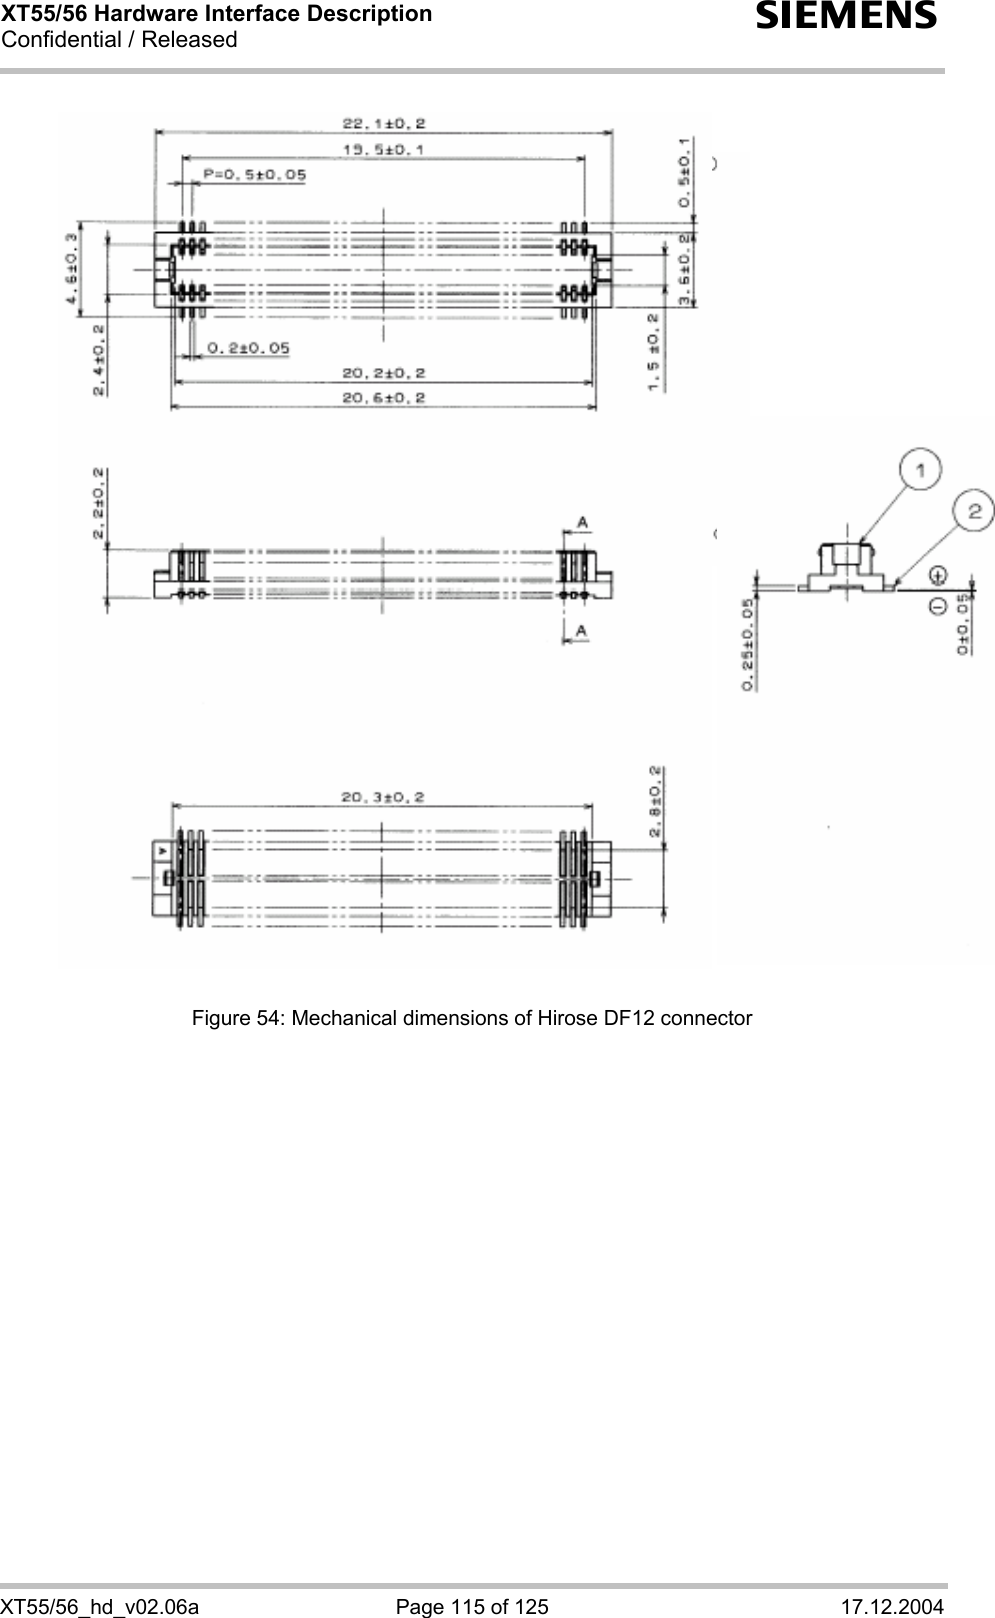 XT55/56 Hardware Interface Description Confidential / Released s XT55/56_hd_v02.06a  Page 115 of 125  17.12.2004      Figure 54: Mechanical dimensions of Hirose DF12 connector 